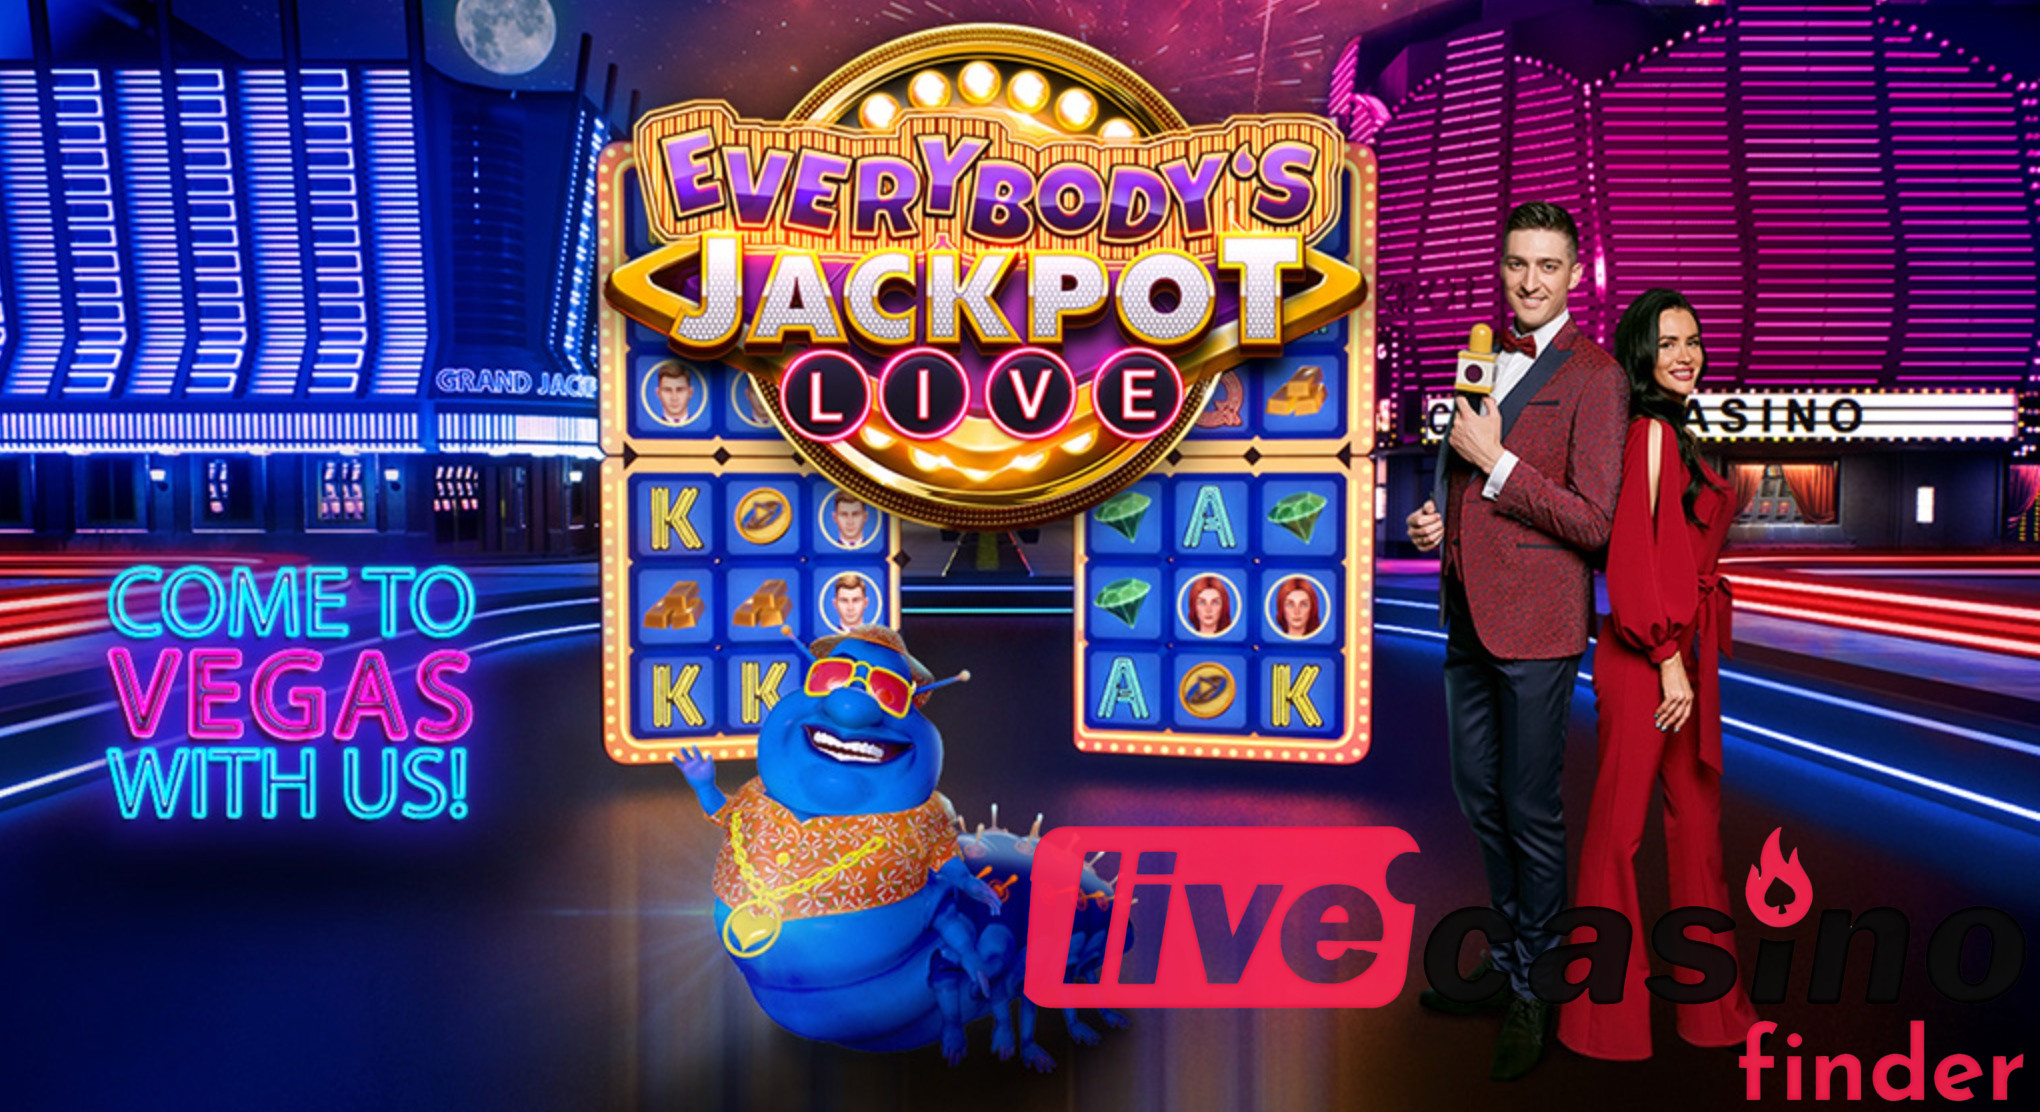 Everybodys Jackpot Live Comment jouer.